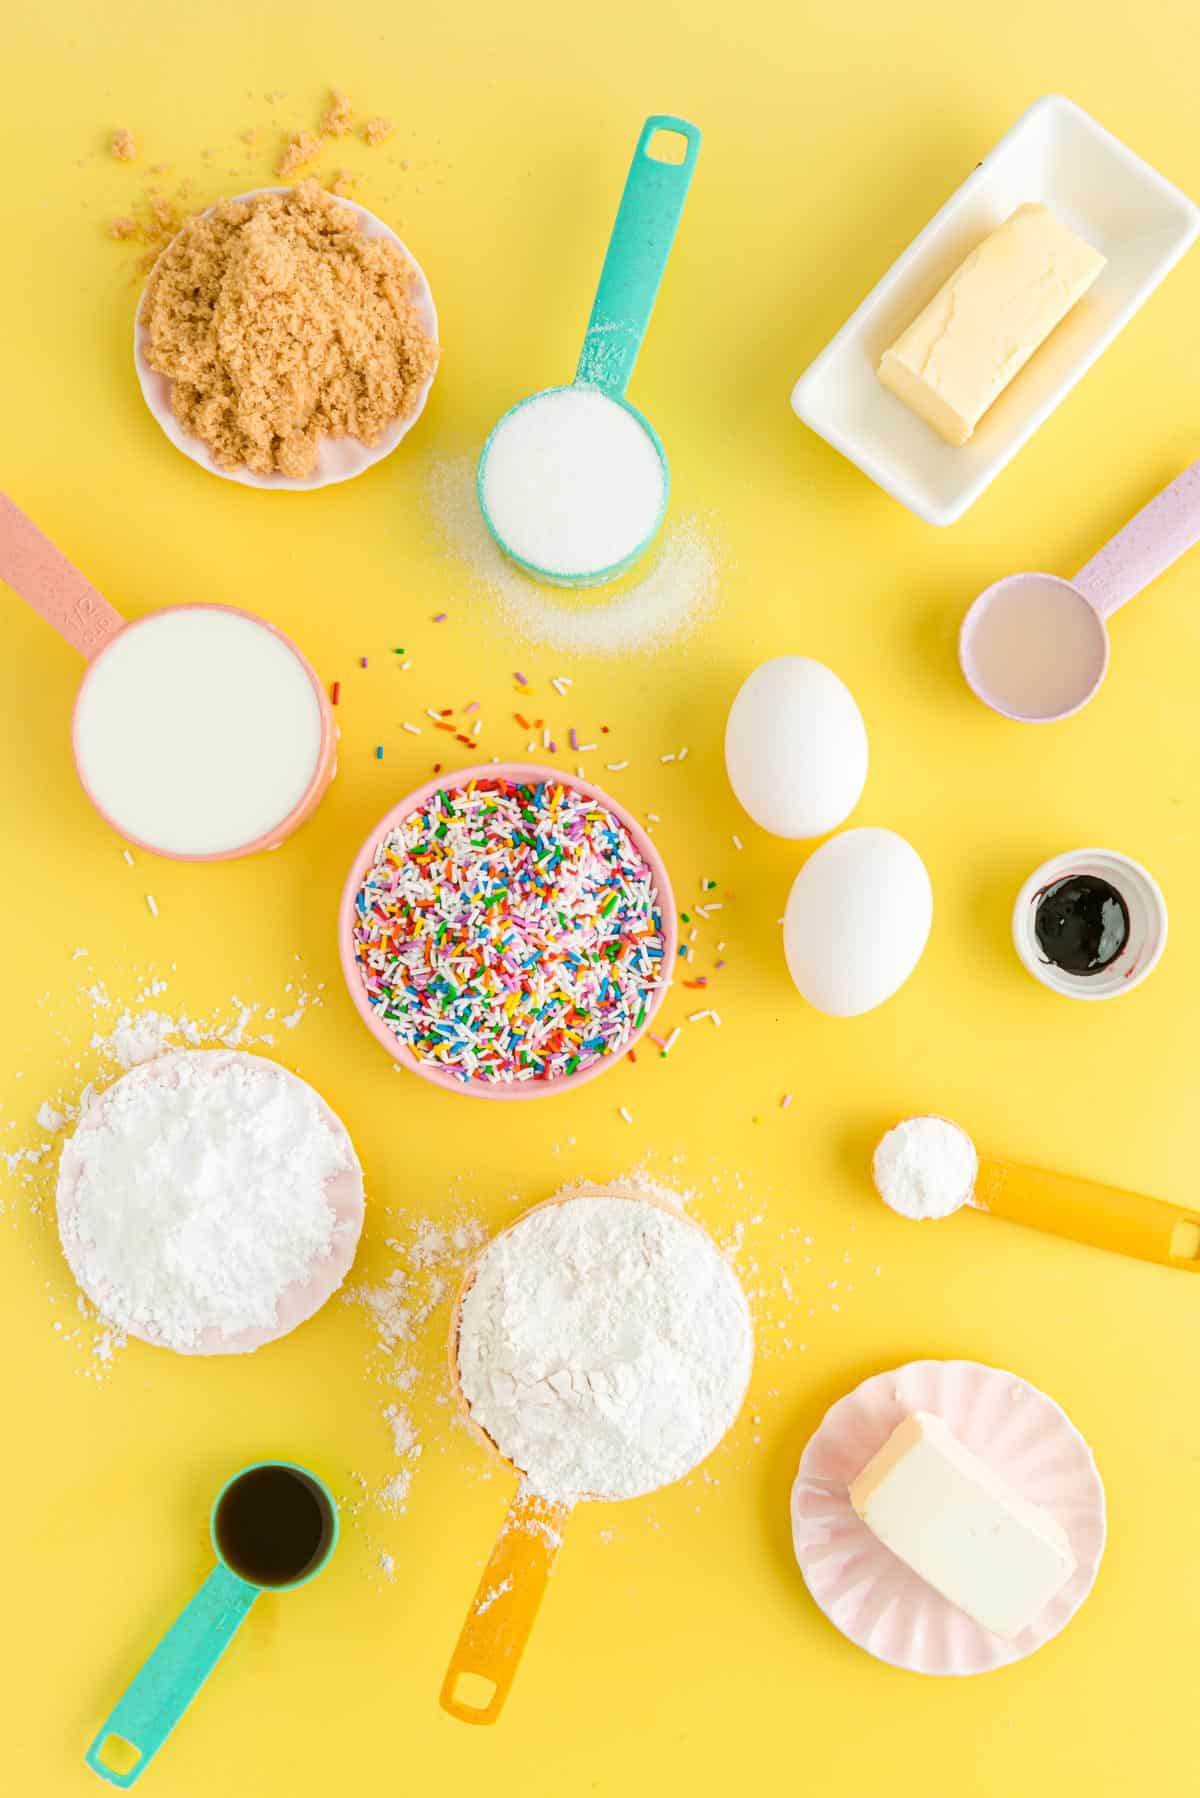 Ingredients to make birthday cake donuts on a yellow surface.